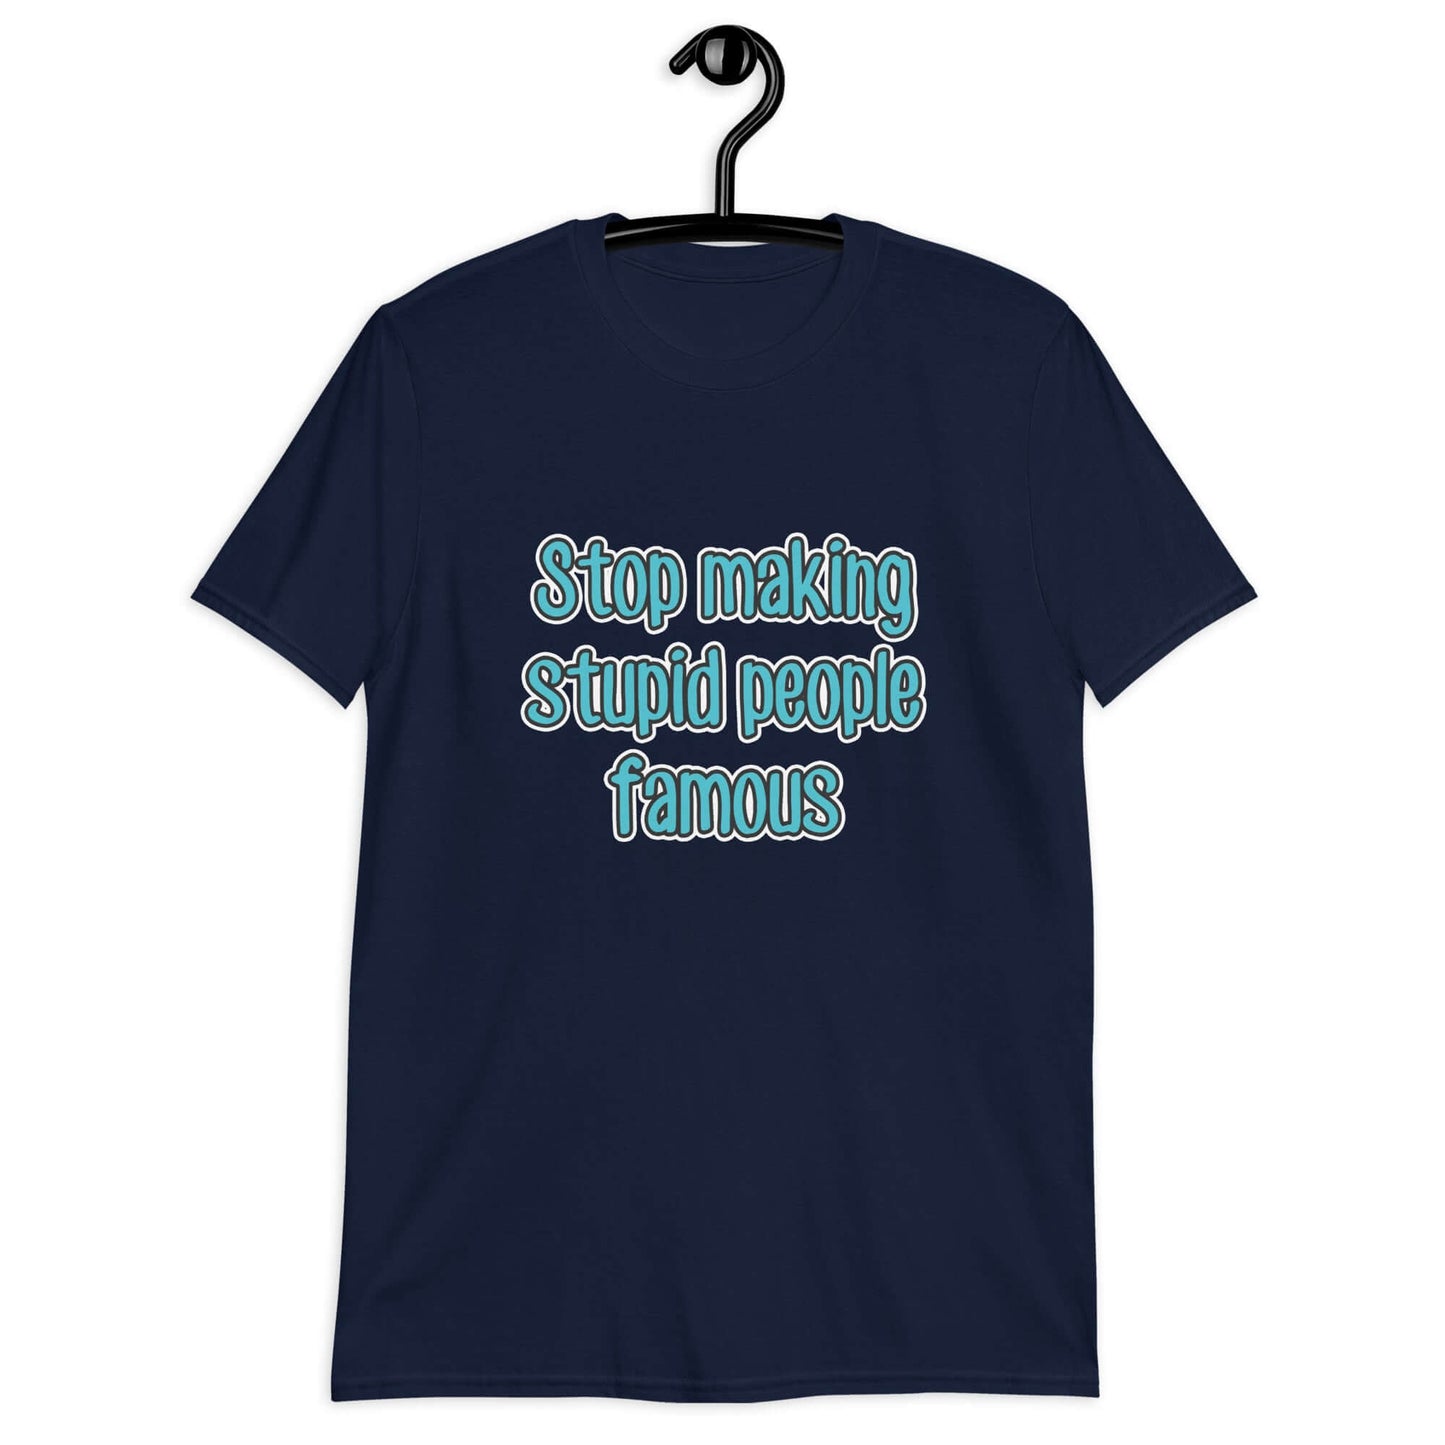 Stop making stupid people famous t-shirt